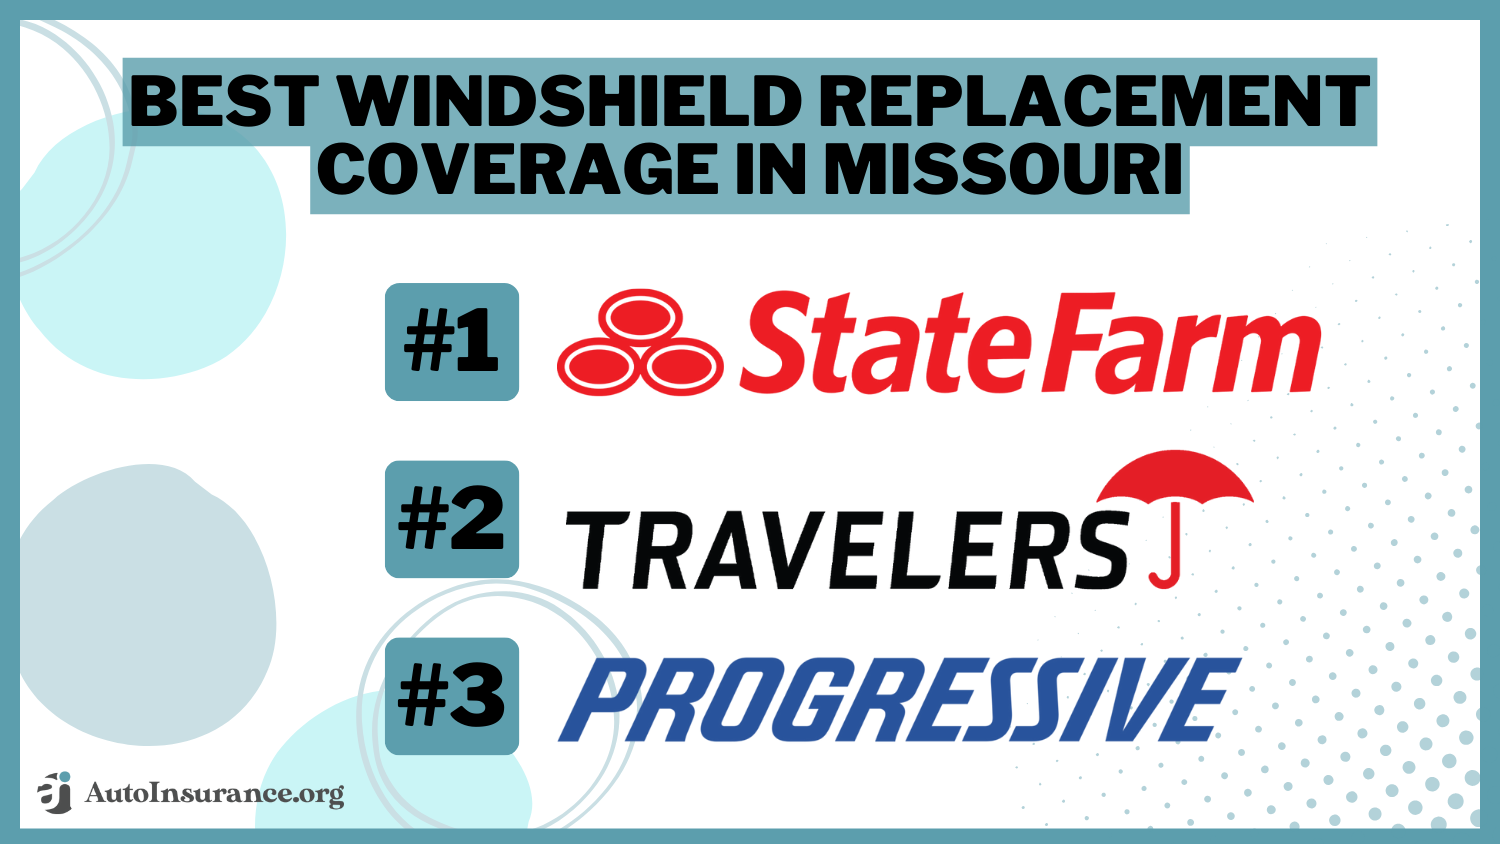 Best Windshield Replacement Coverage in Missouri: State Farm, Travelers, and Progressive